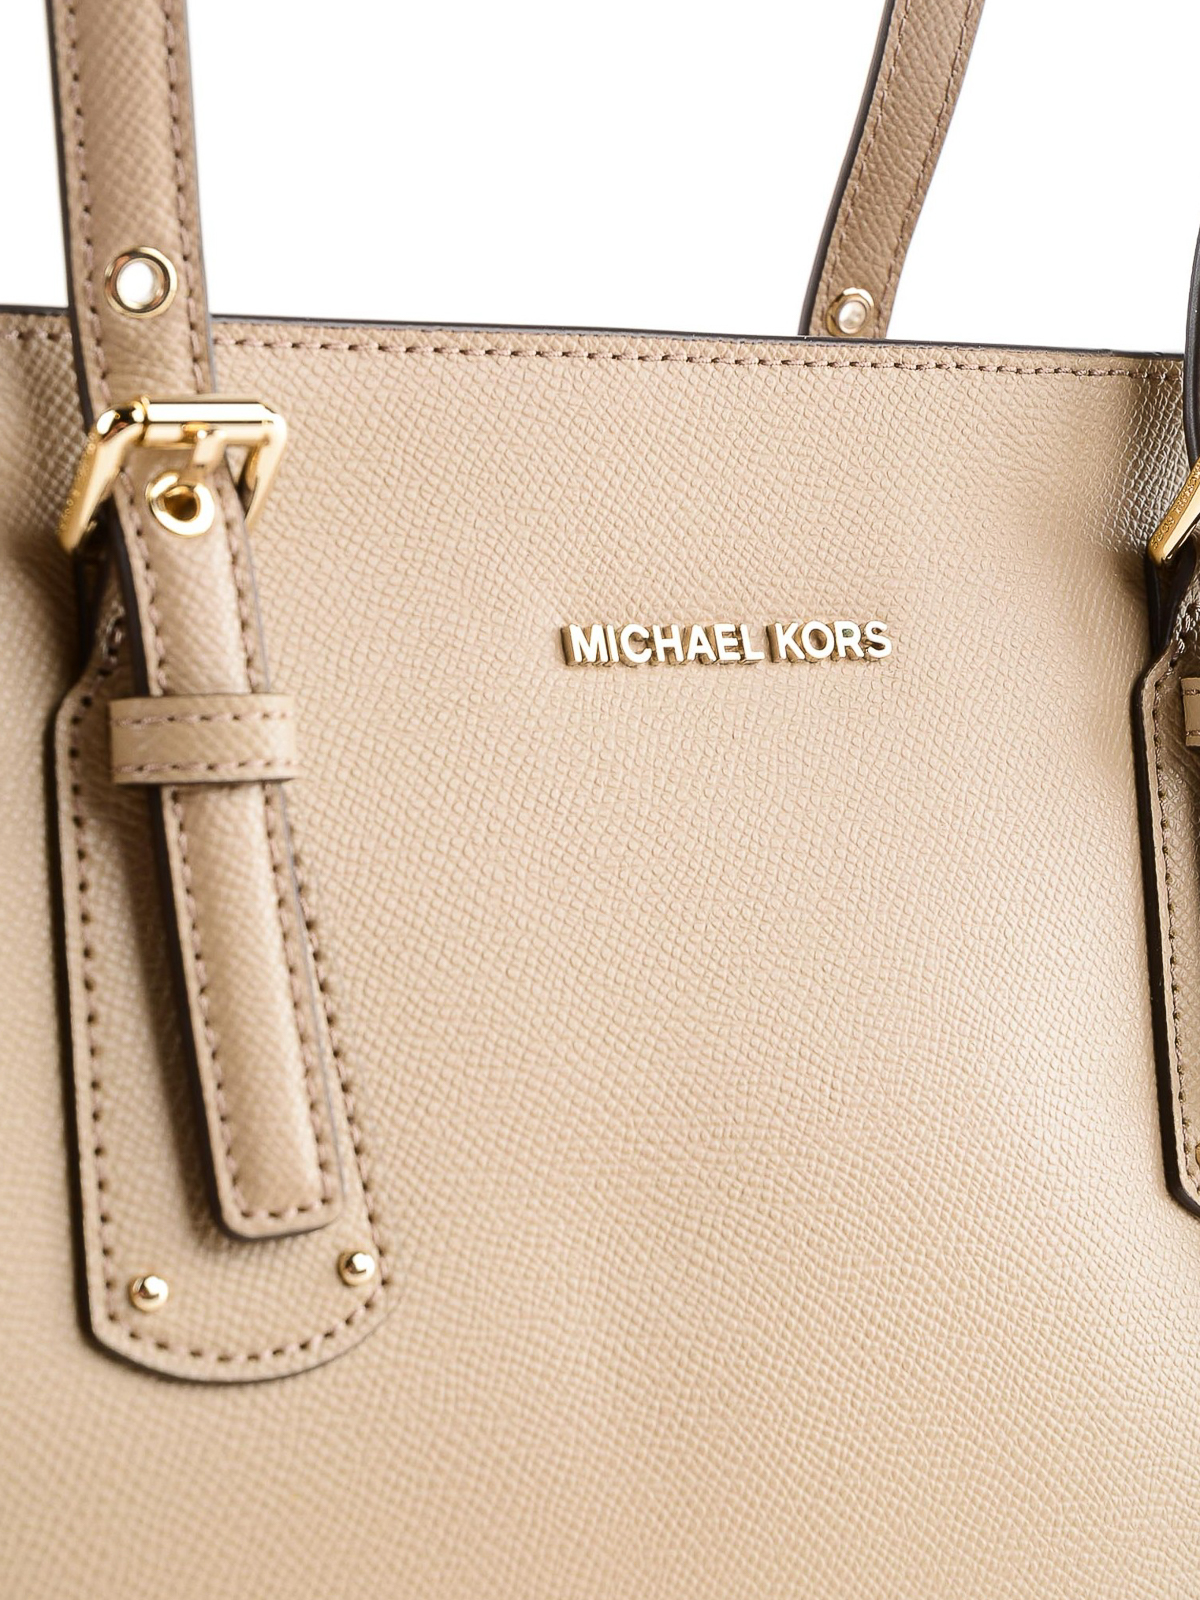 Totes bags Michael Kors - Voyager beige leather tote bag - 30F8TV6T4L208